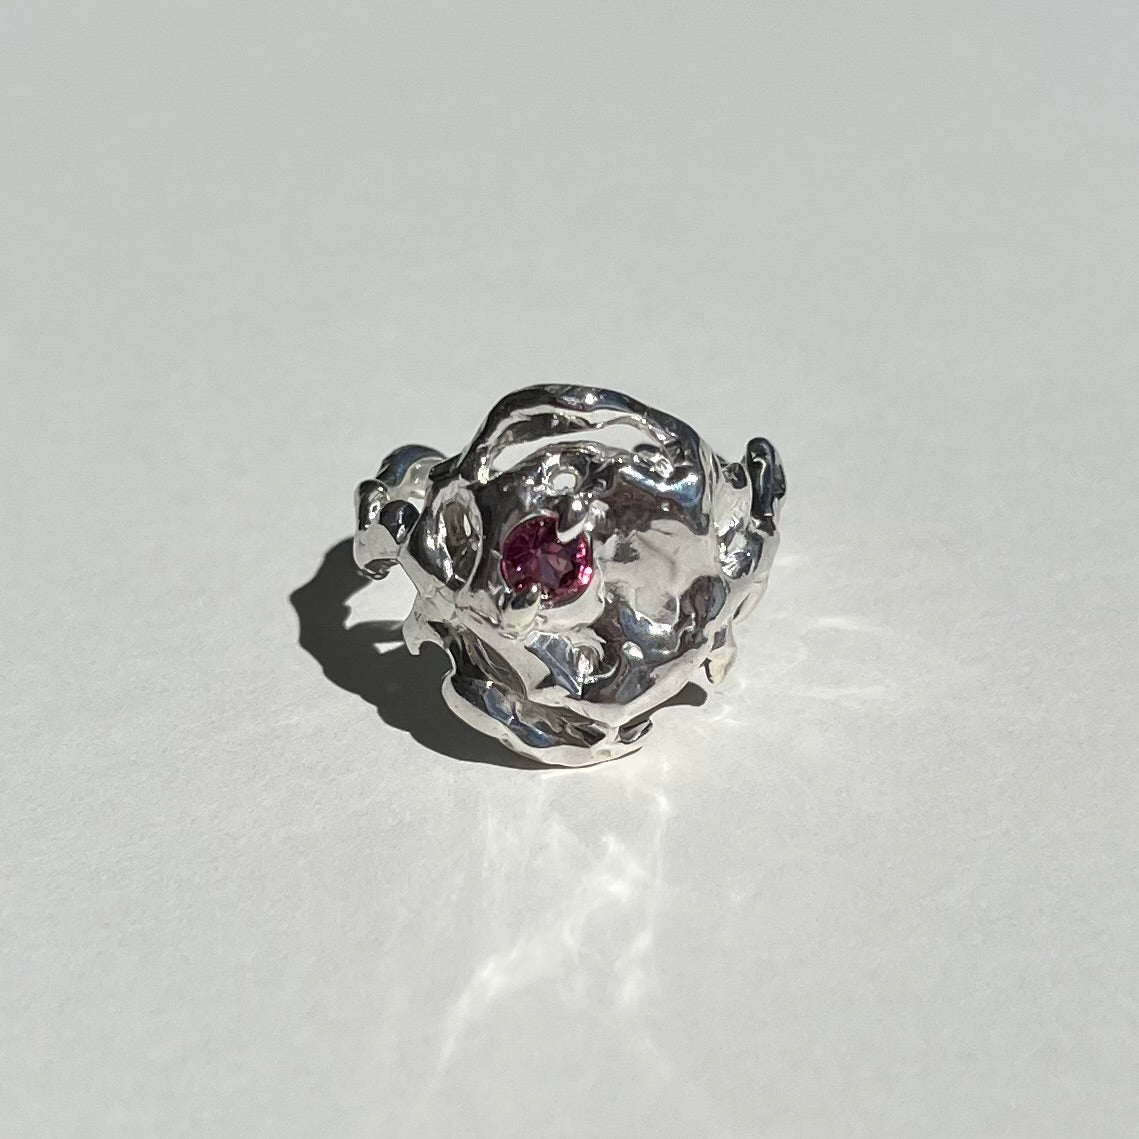 KHAOS sterling silver and pink Tourmaline chevaliere ring I